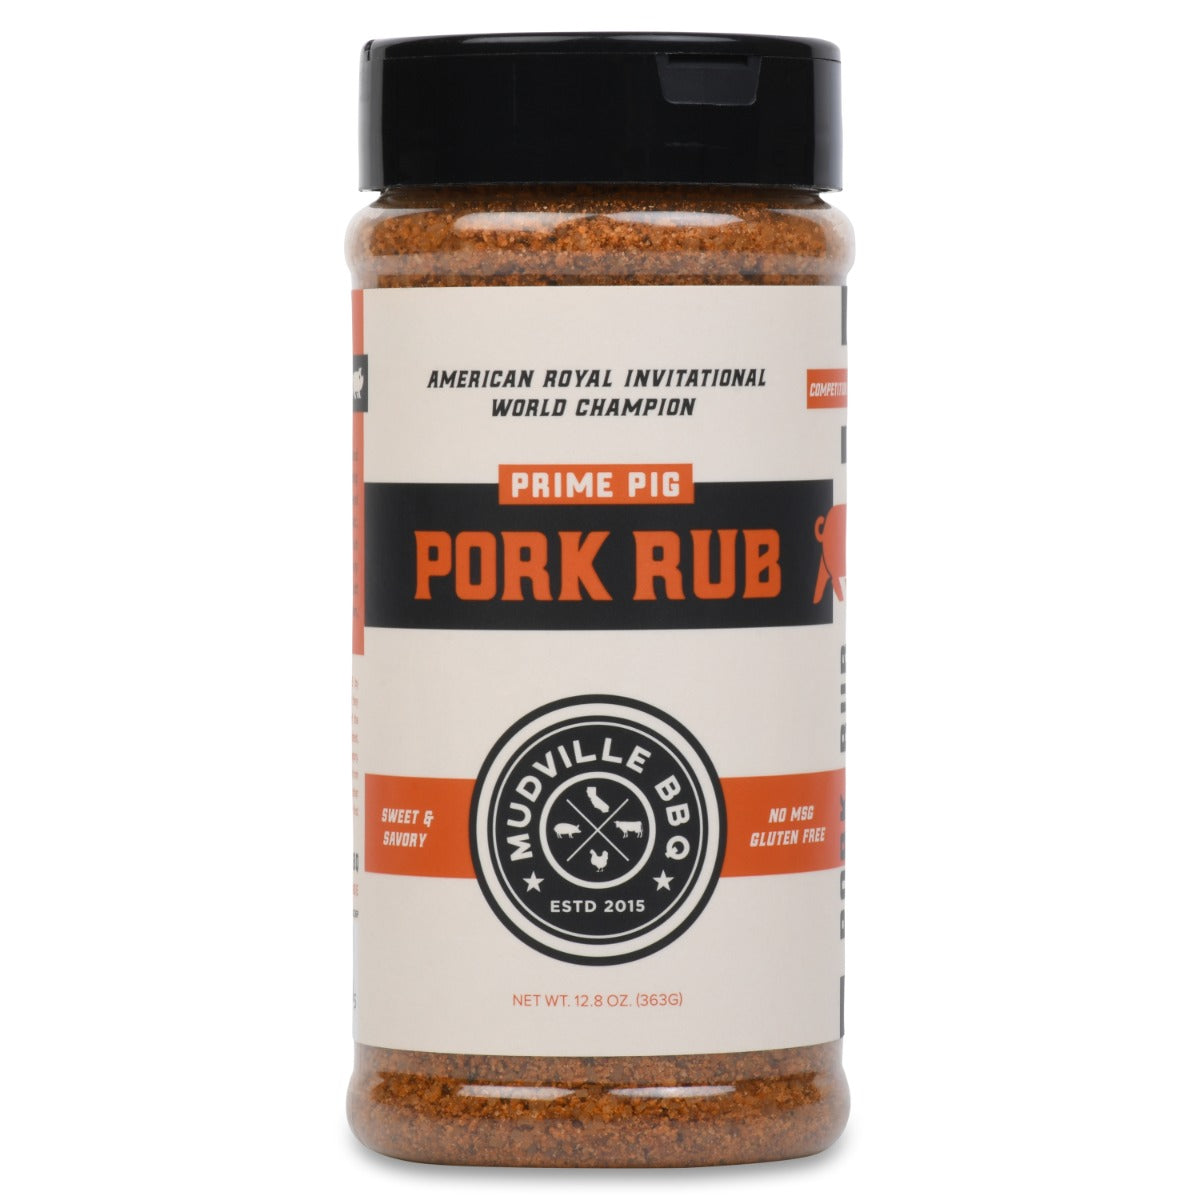 Front view of a Prime Pig Pork Rub bottle. The label highlights that it is a pork rub, American Royal Invitational World Champion, with sweet and savory flavors, and is free of MSG and gluten.